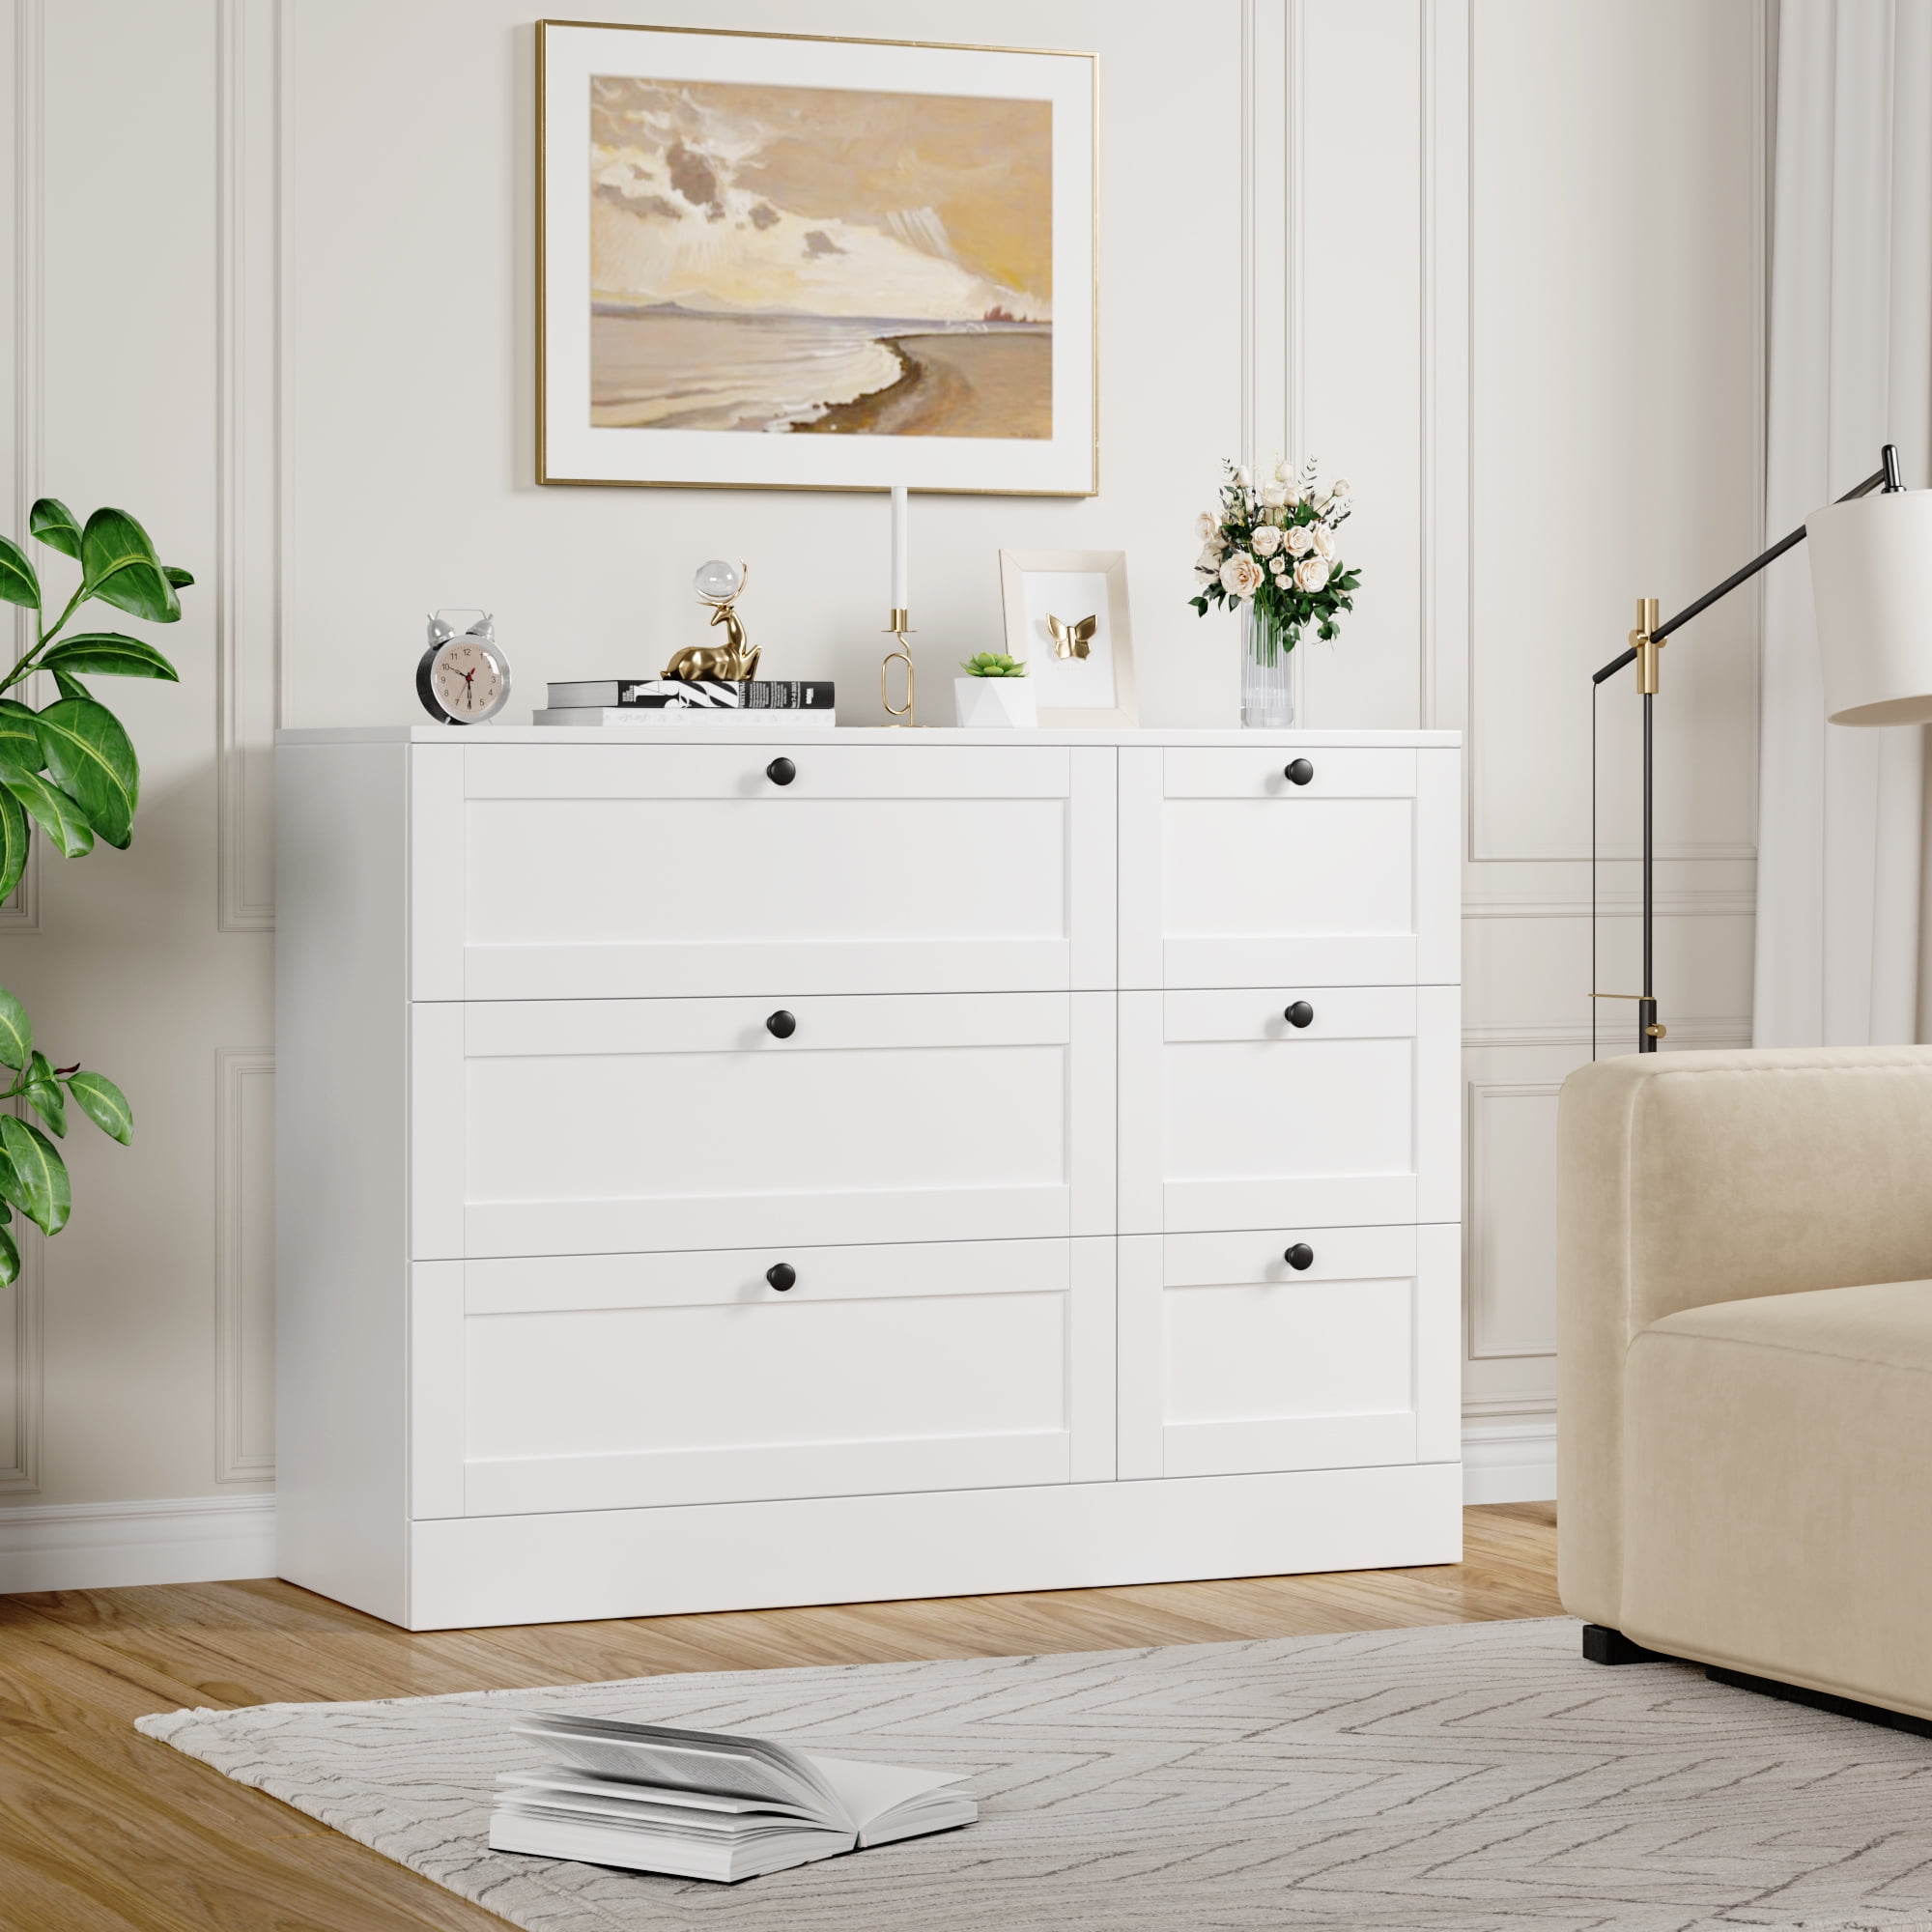 Homfa 6 Drawer White Double Dresser,Wood Storage Cabinet for Living ...